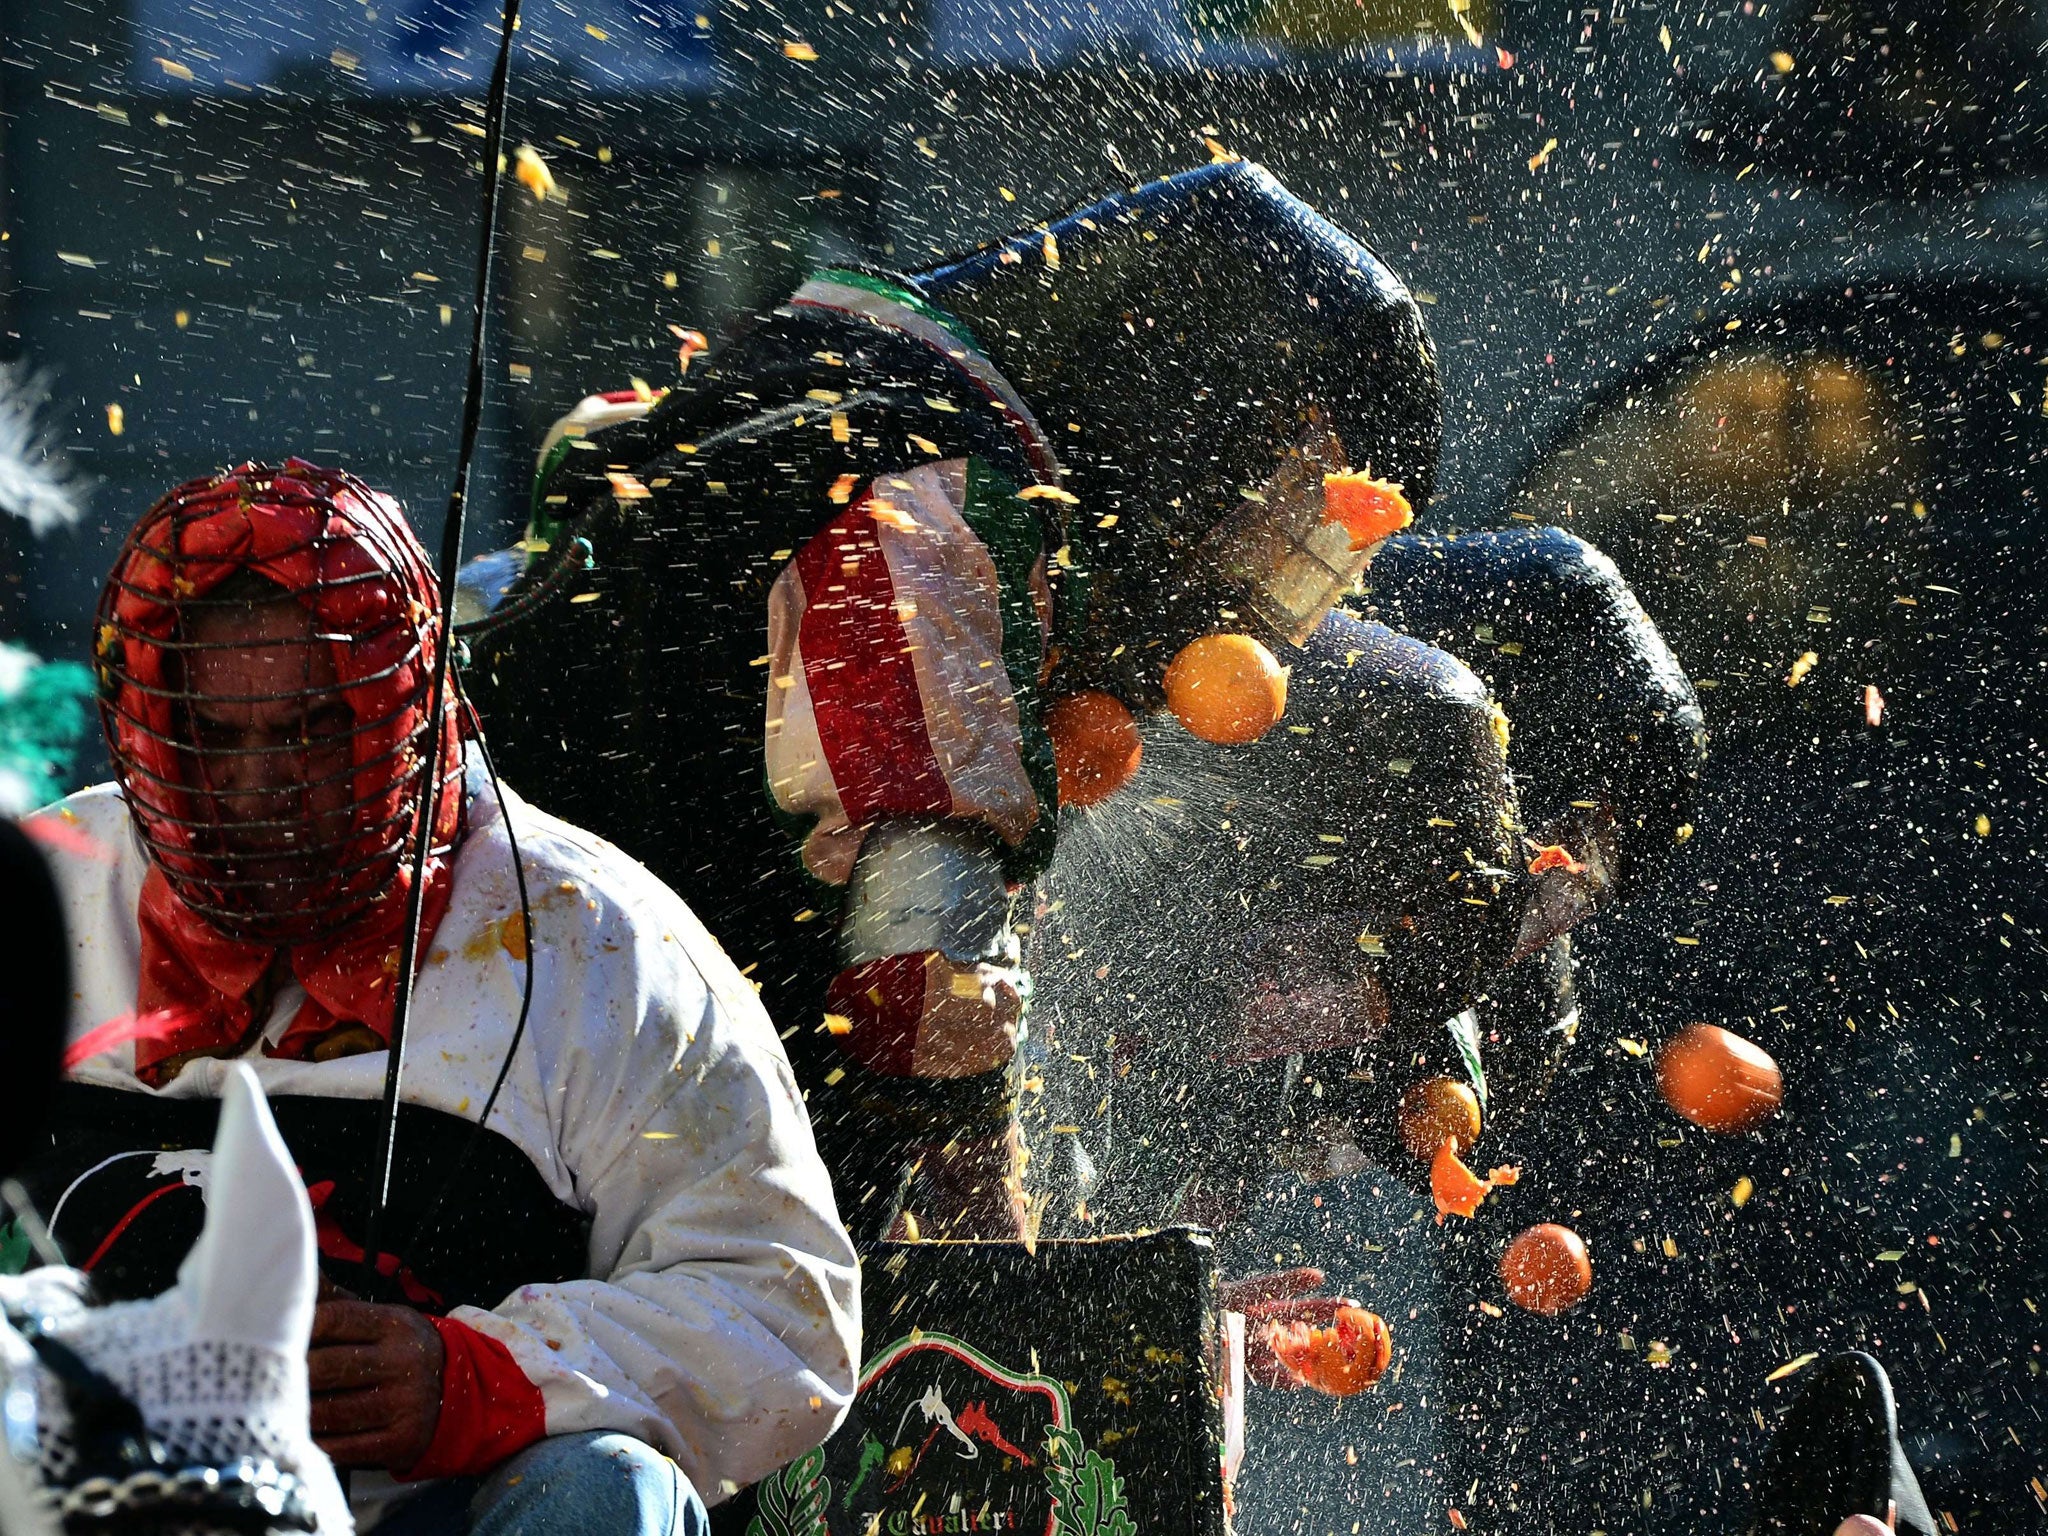 Men with helmets are hit by oranges during the traditional 'battle of the oranges' held during the carnival in Ivrea, near Turin